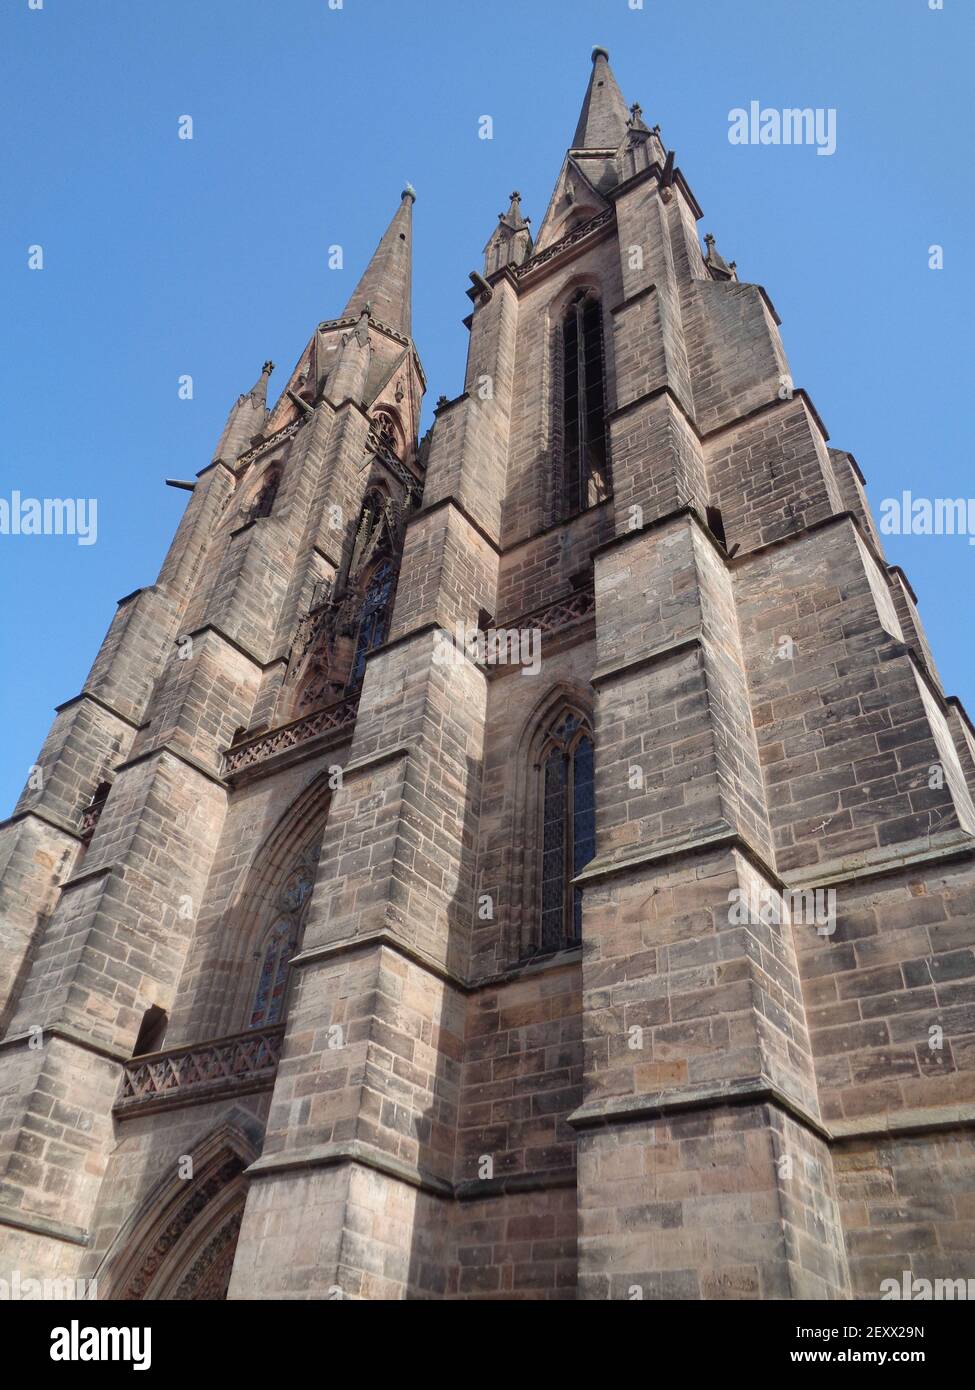 The Church of St. Elisabeth in Marburg, Germany is the oldest Gothic church in German-speaking countries. Stock Photo